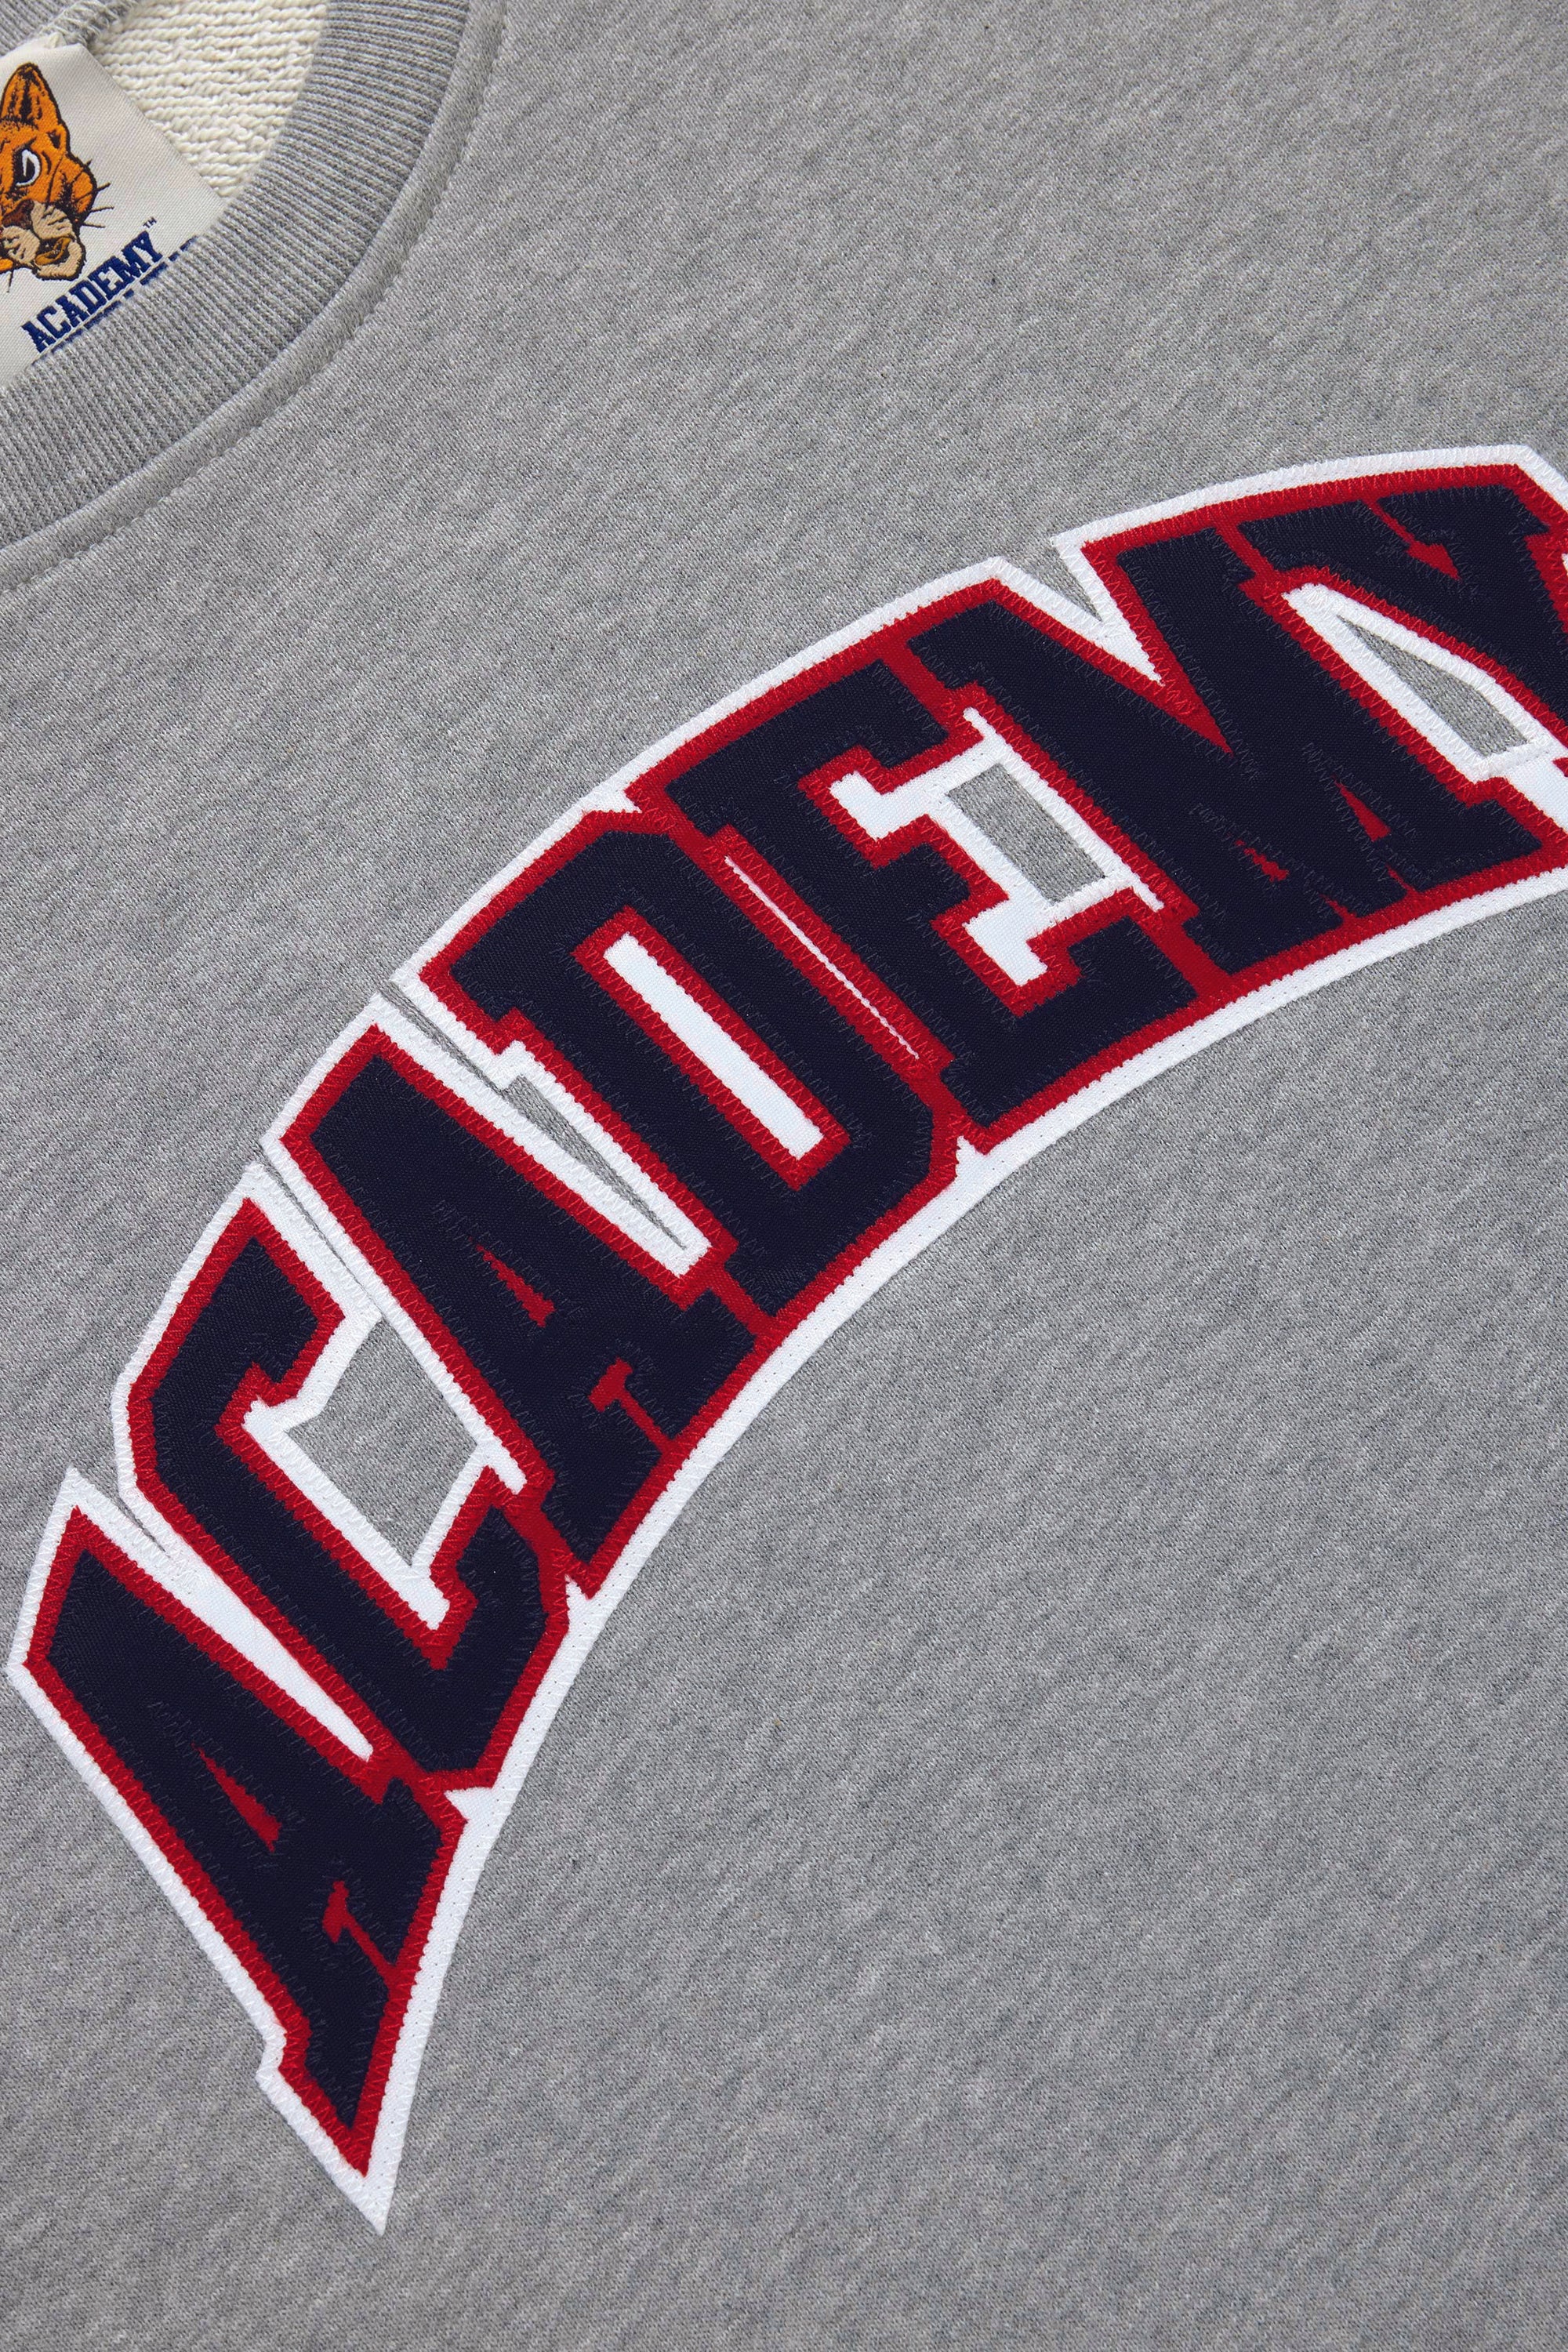 The Bookstore Crewneck, Navy/Red